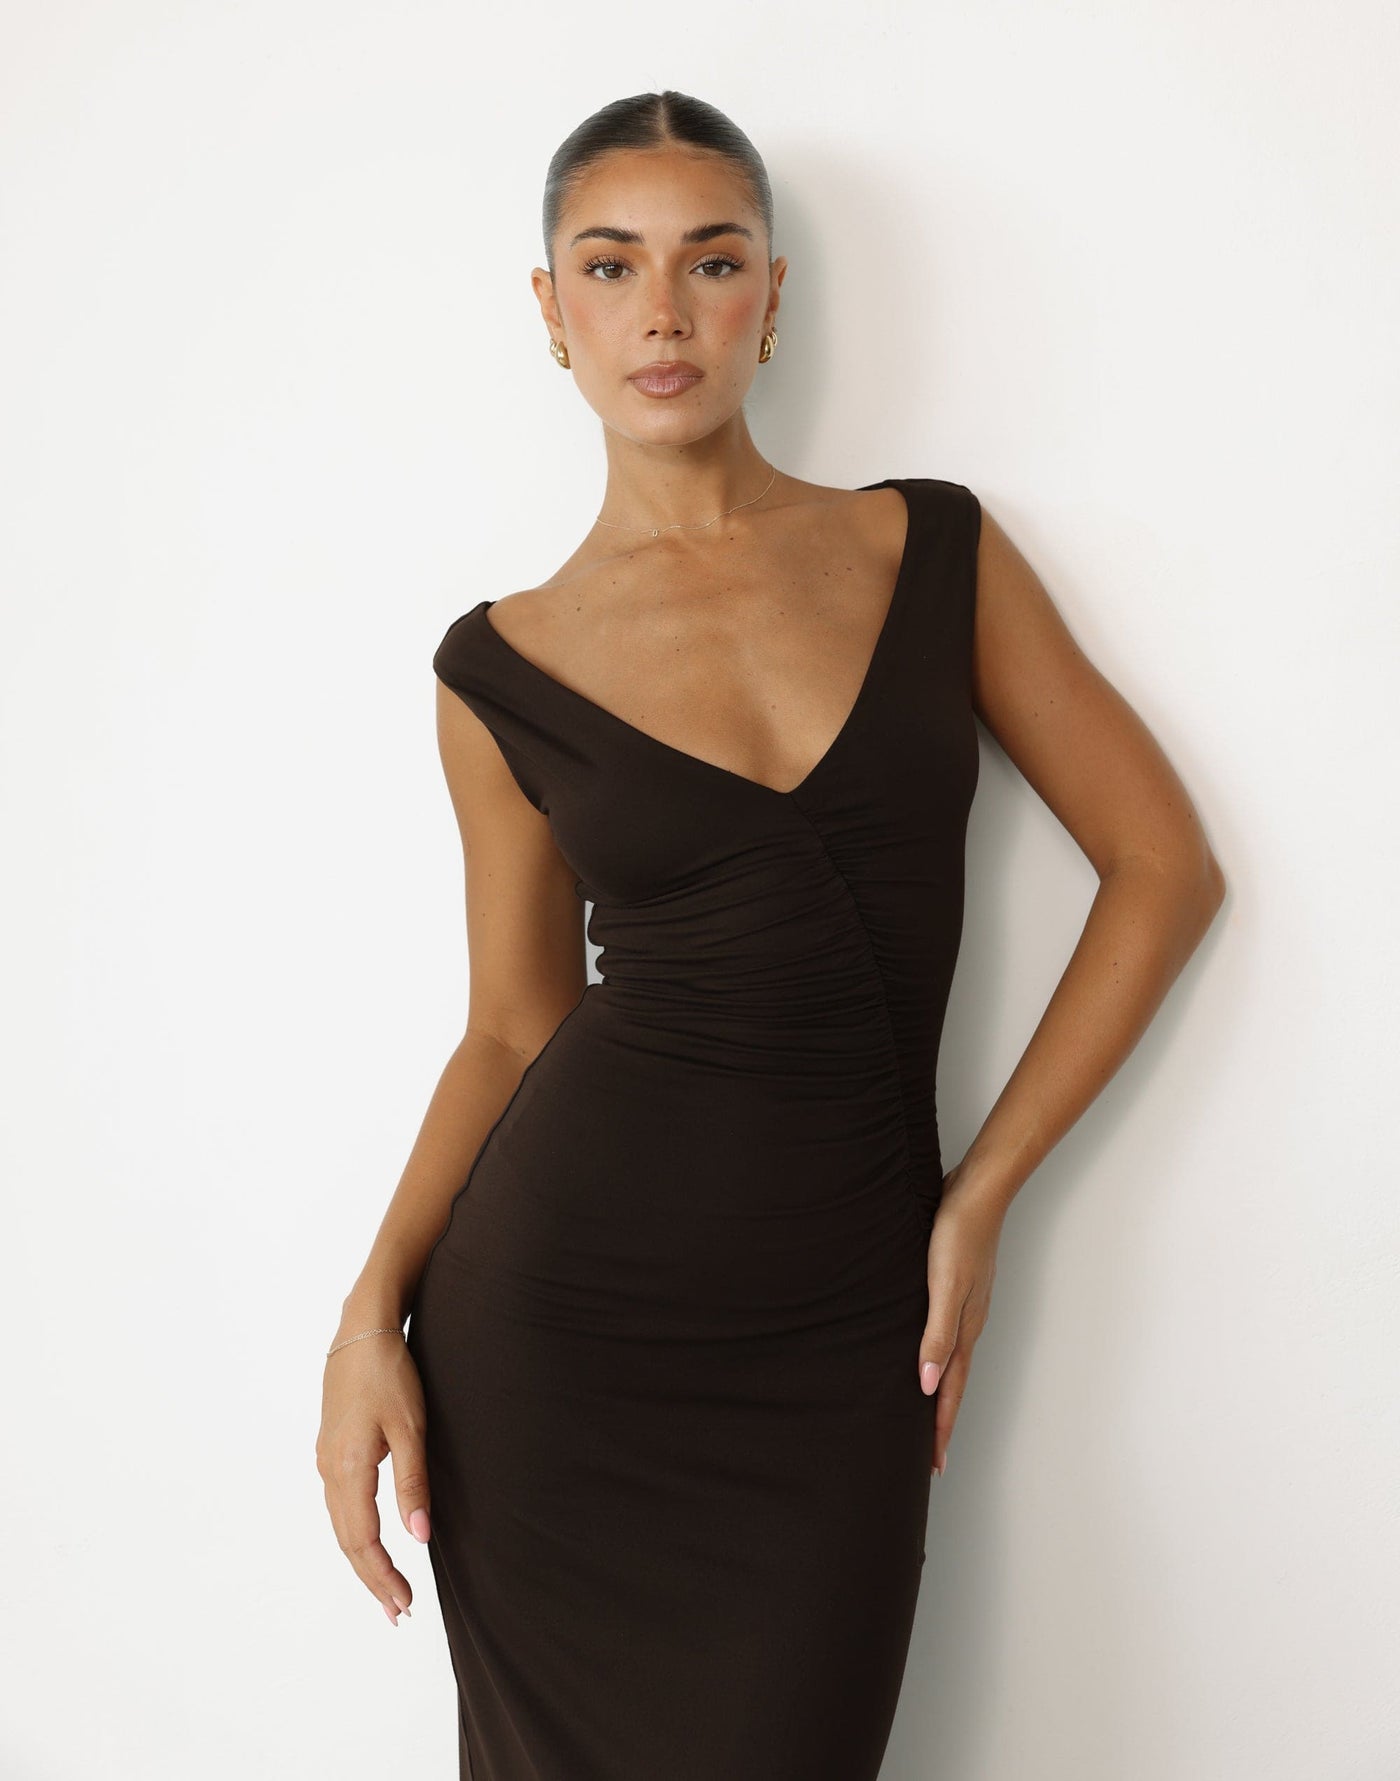 Viola Maxi Dress (Chocolate) | CHARCOAL Exclusive - Low V-neck Bodycon Ruched Maxi Dress - Women's Dress - Charcoal Clothing